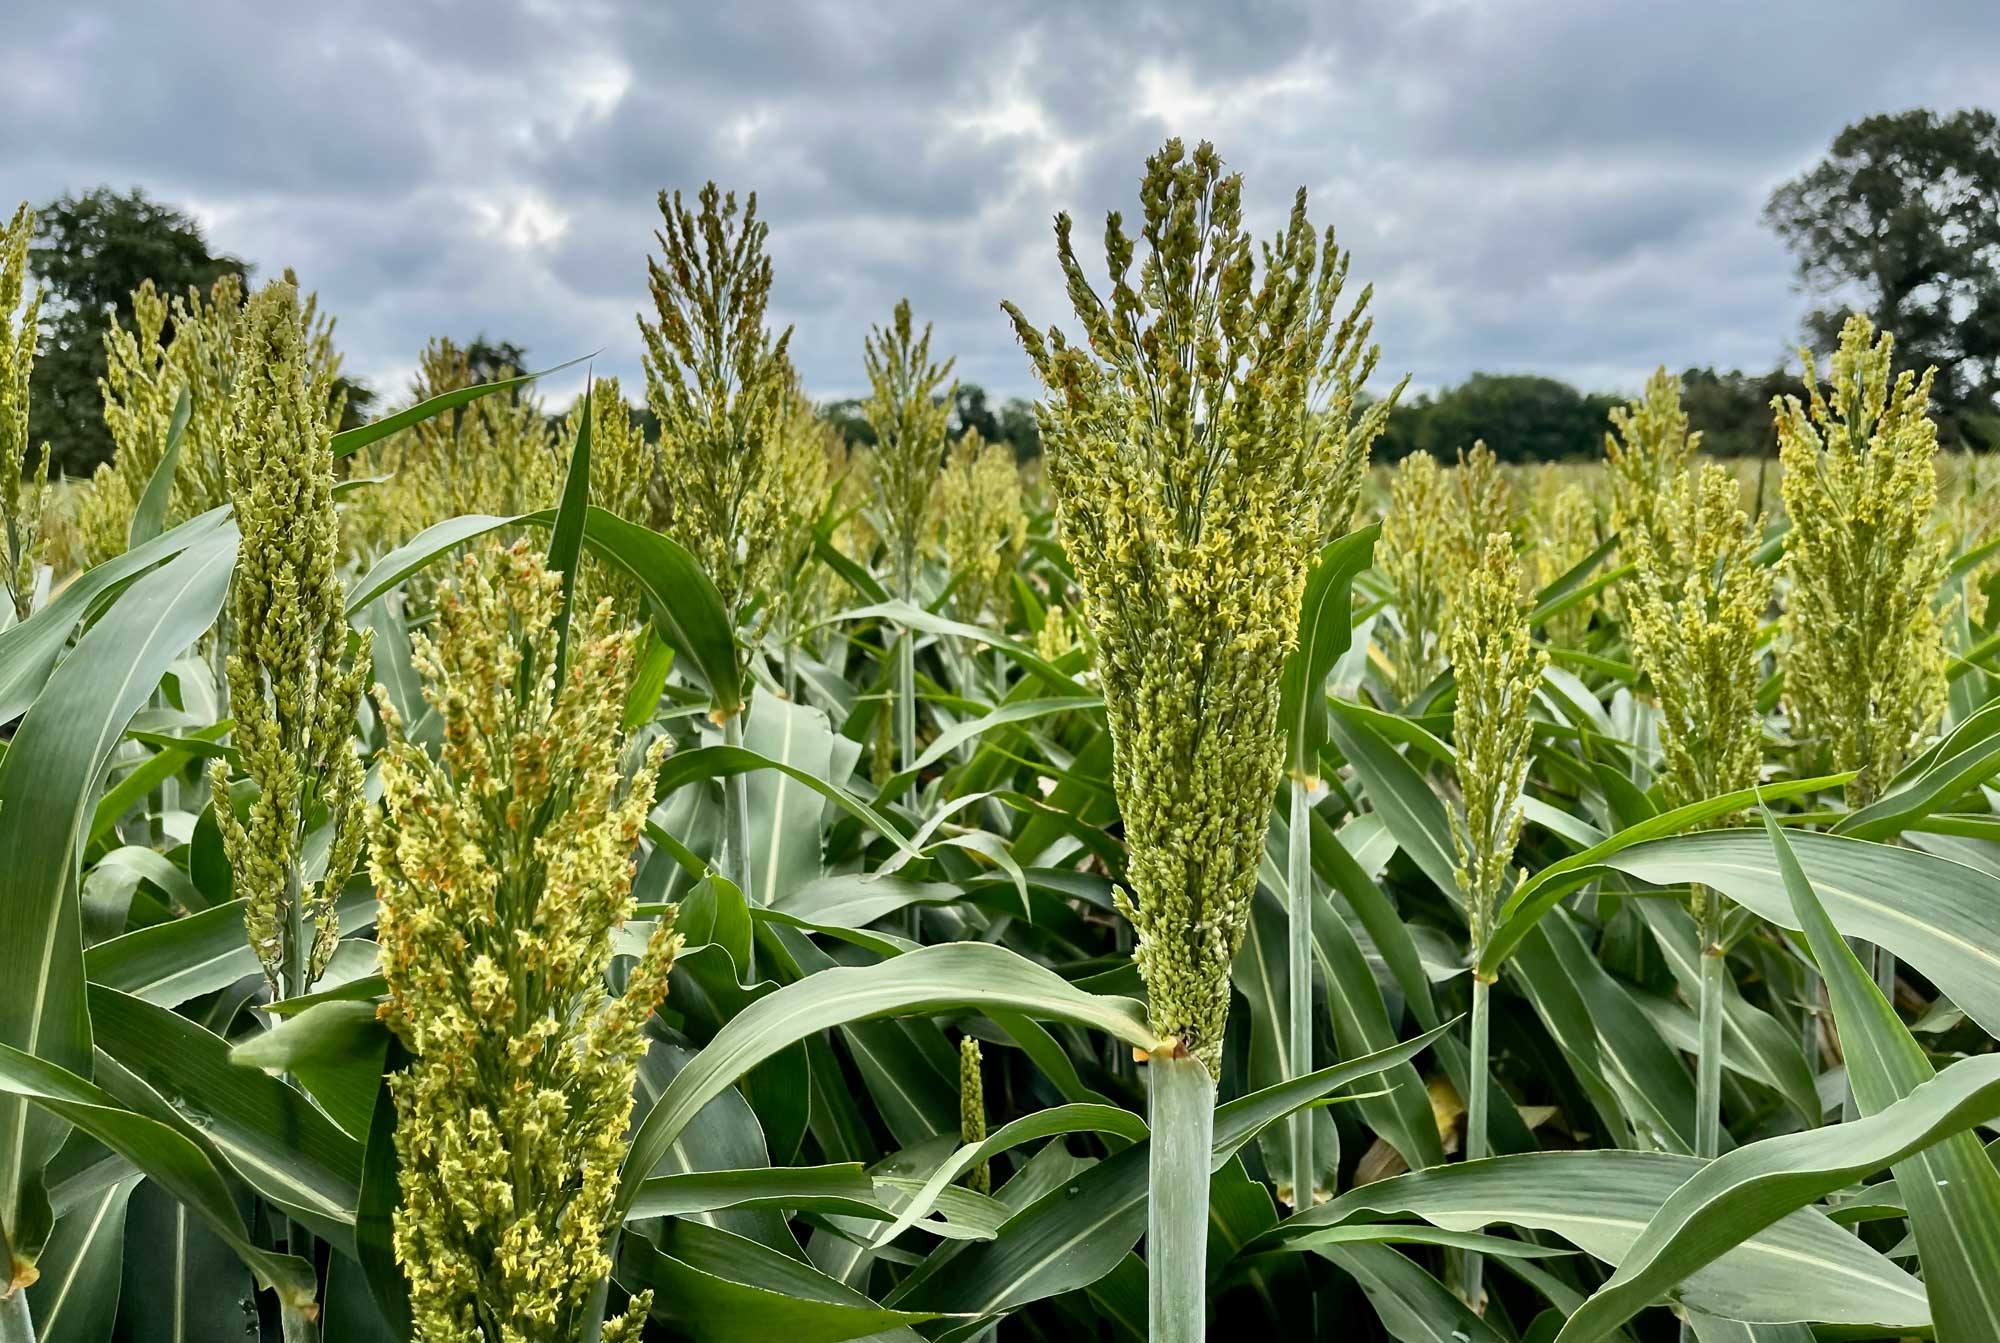 Photograph of sorghum plants in flower. The photo shows the heads of sorghum plants in the field, partially emerged from the flag leaves and partially in flower.